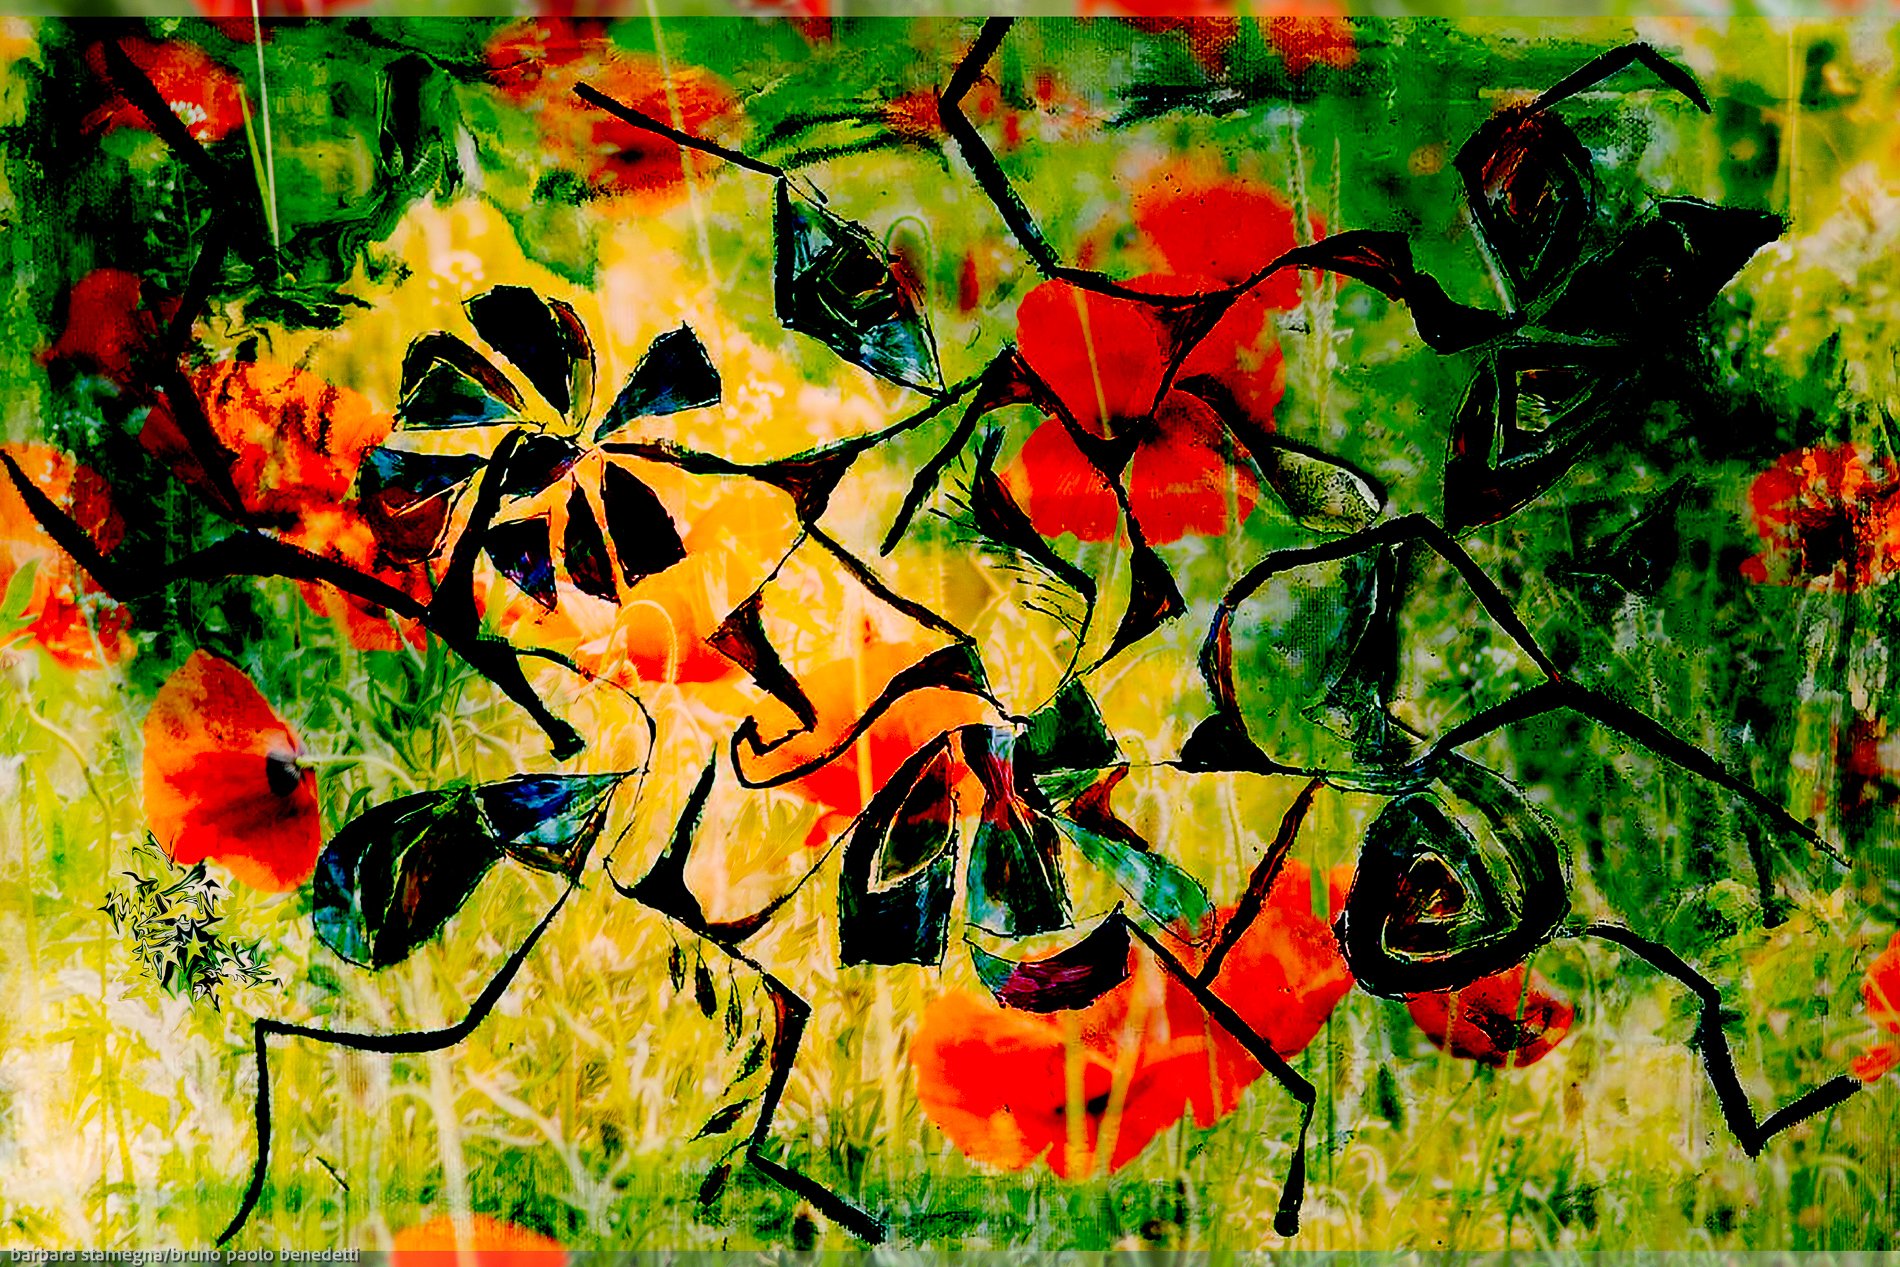 abstract art image made by merging abstract photograph and painting in artwork with floral pattern with mystic and symbolic value